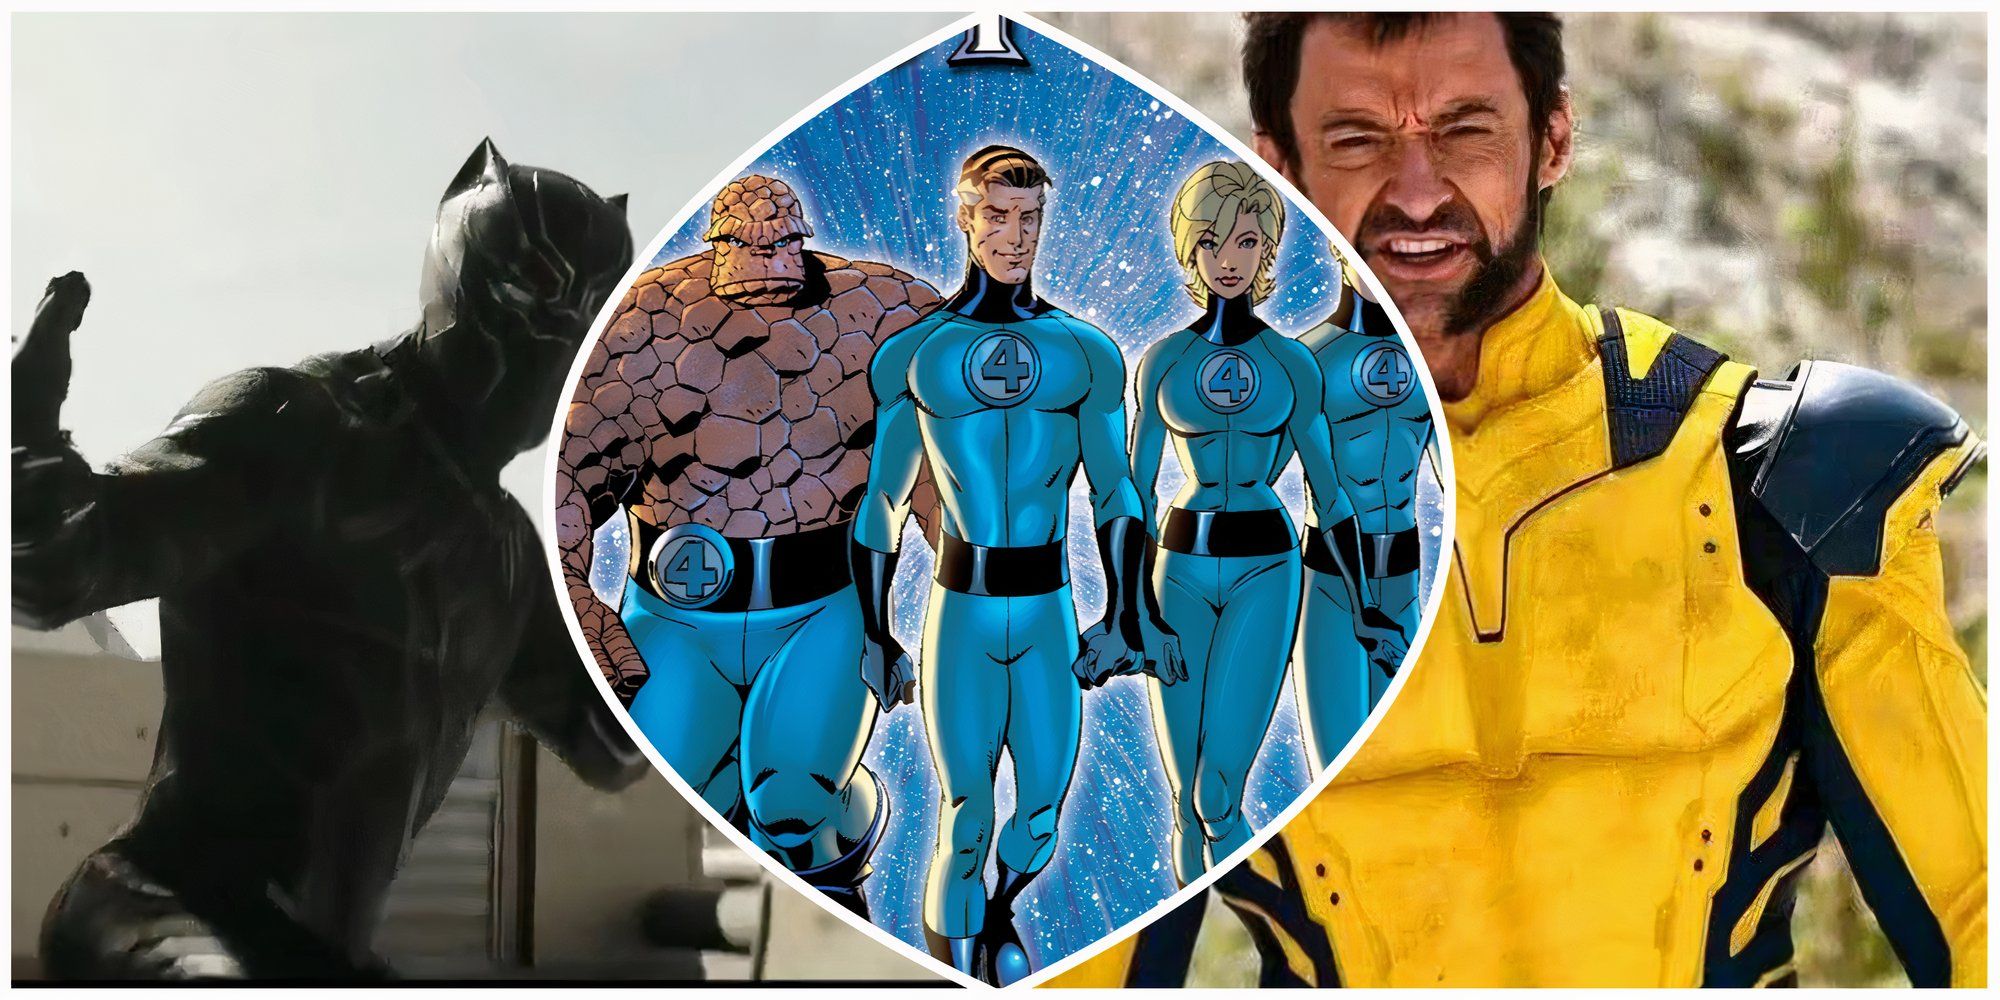 Fantastic Four, Black Panther, and WOlverine